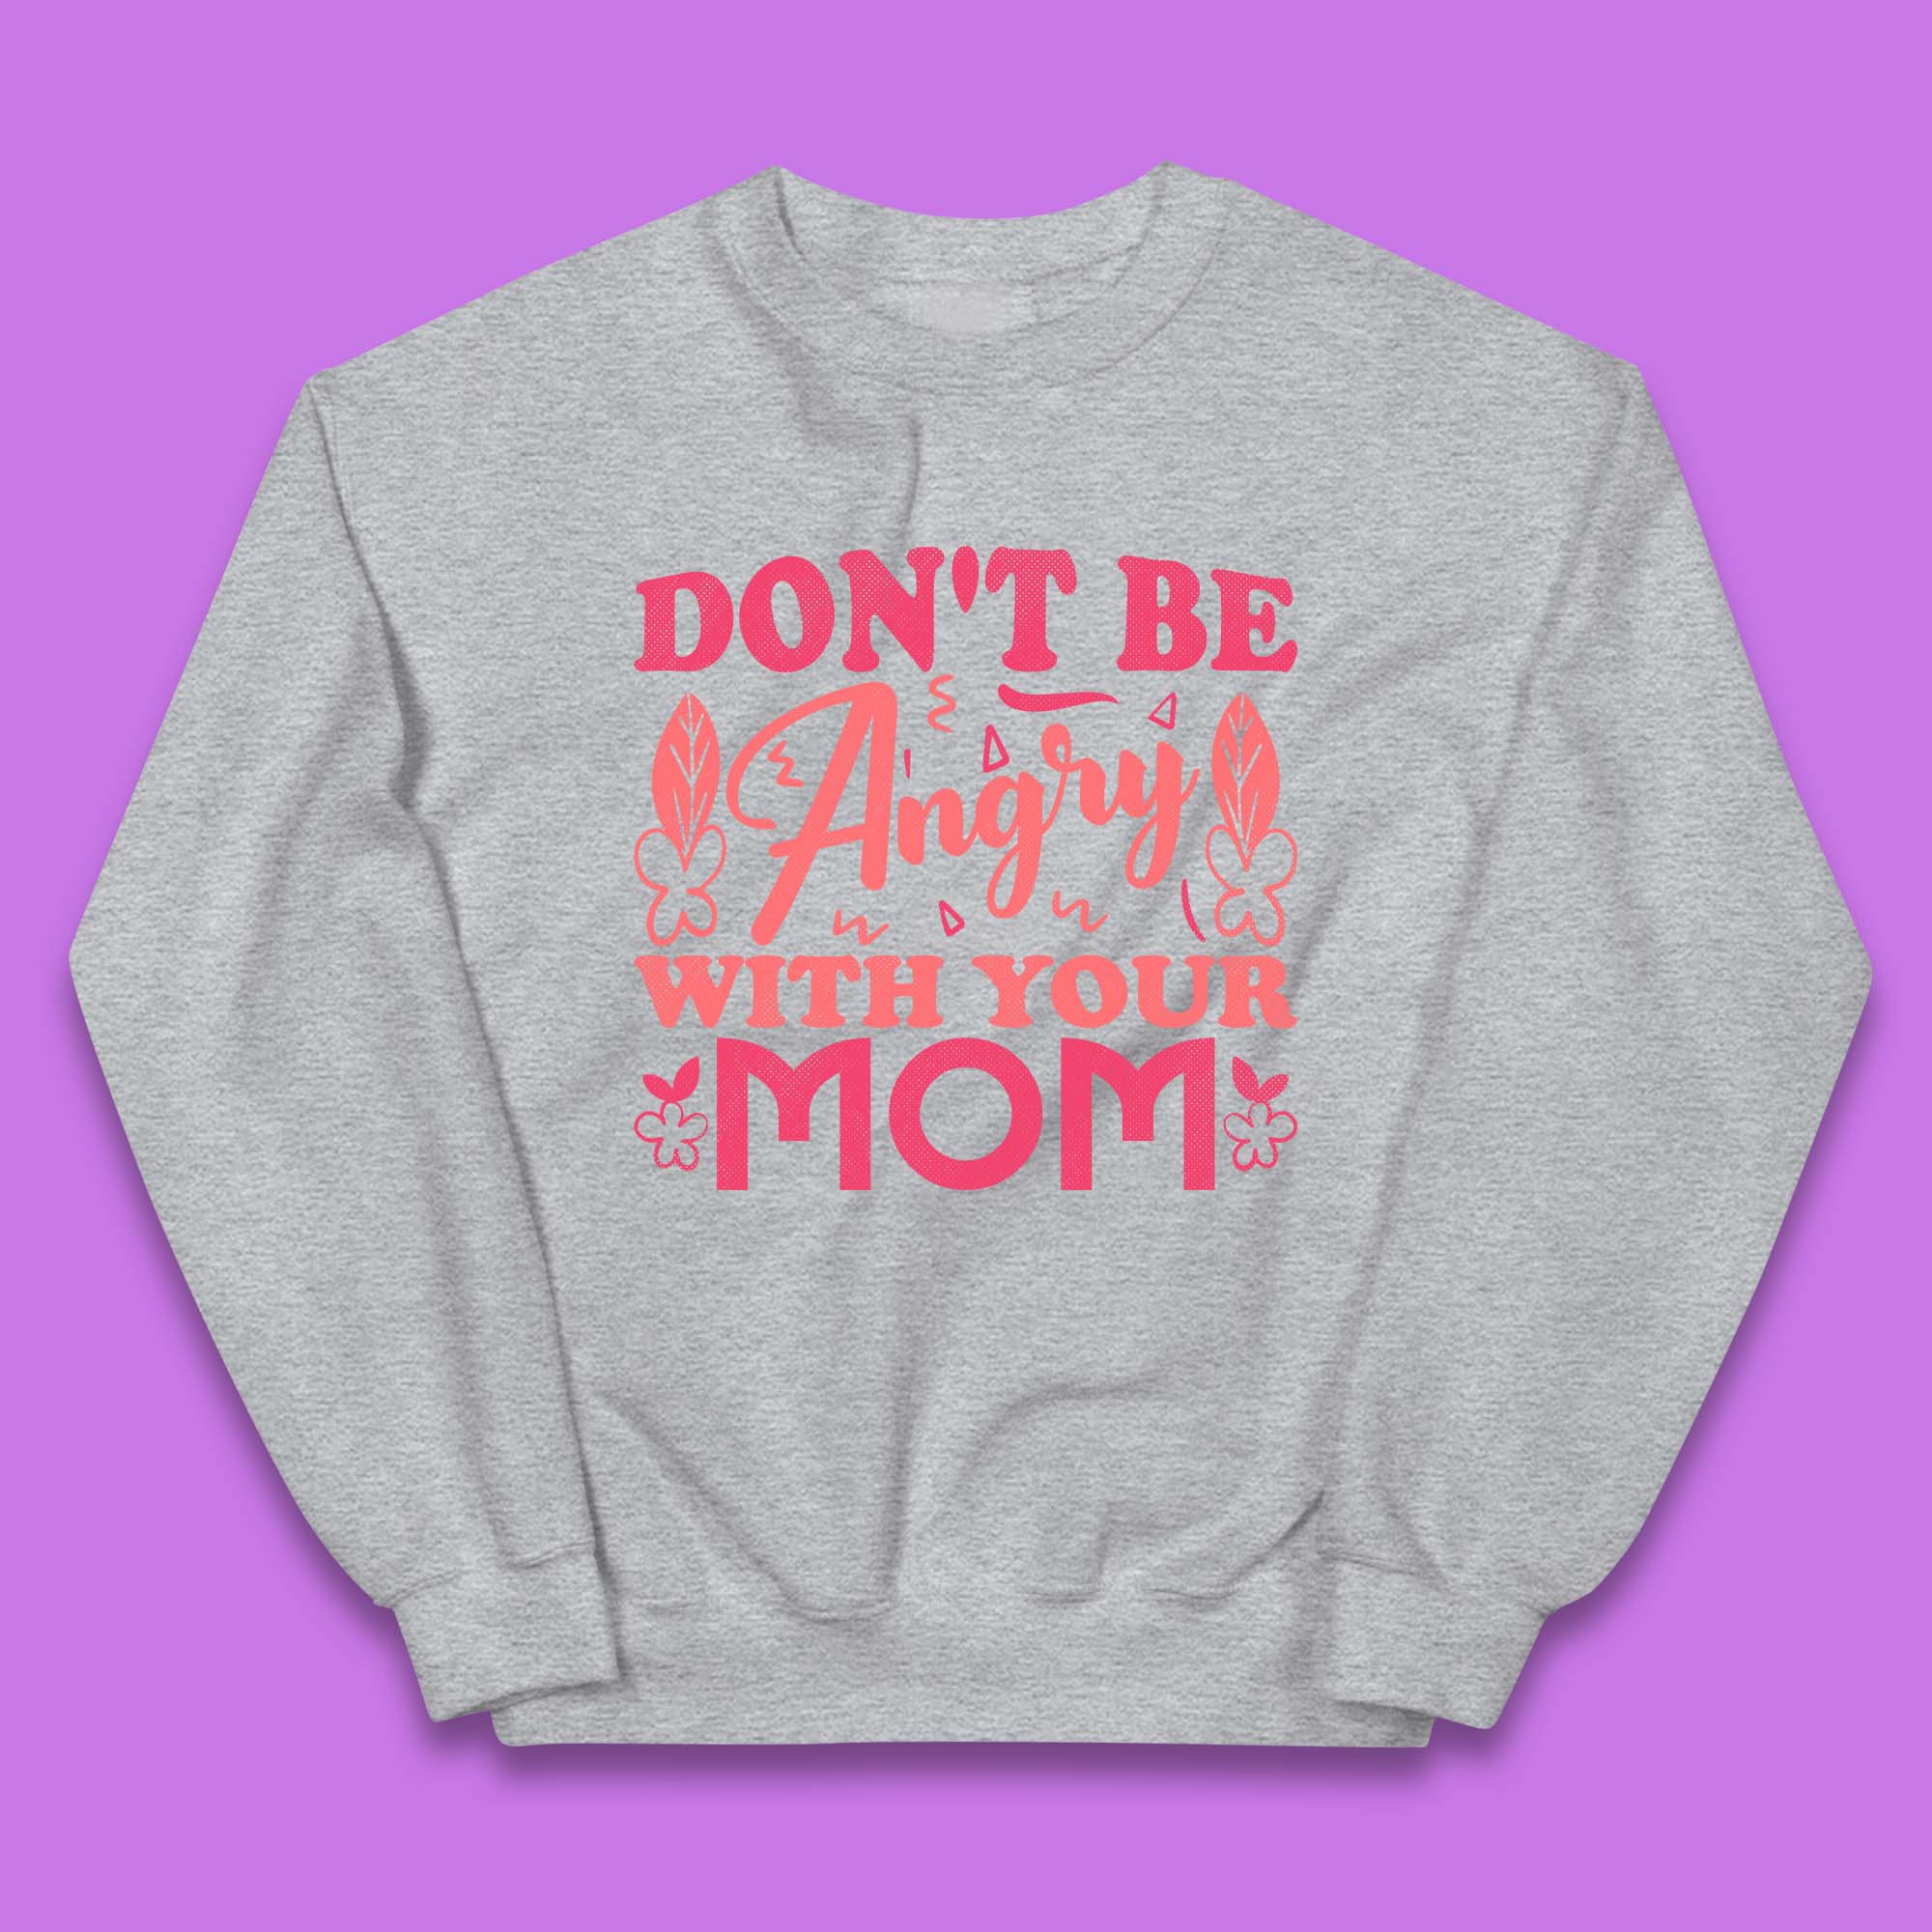 Don't Be Angry With Your Mom Kids Jumper